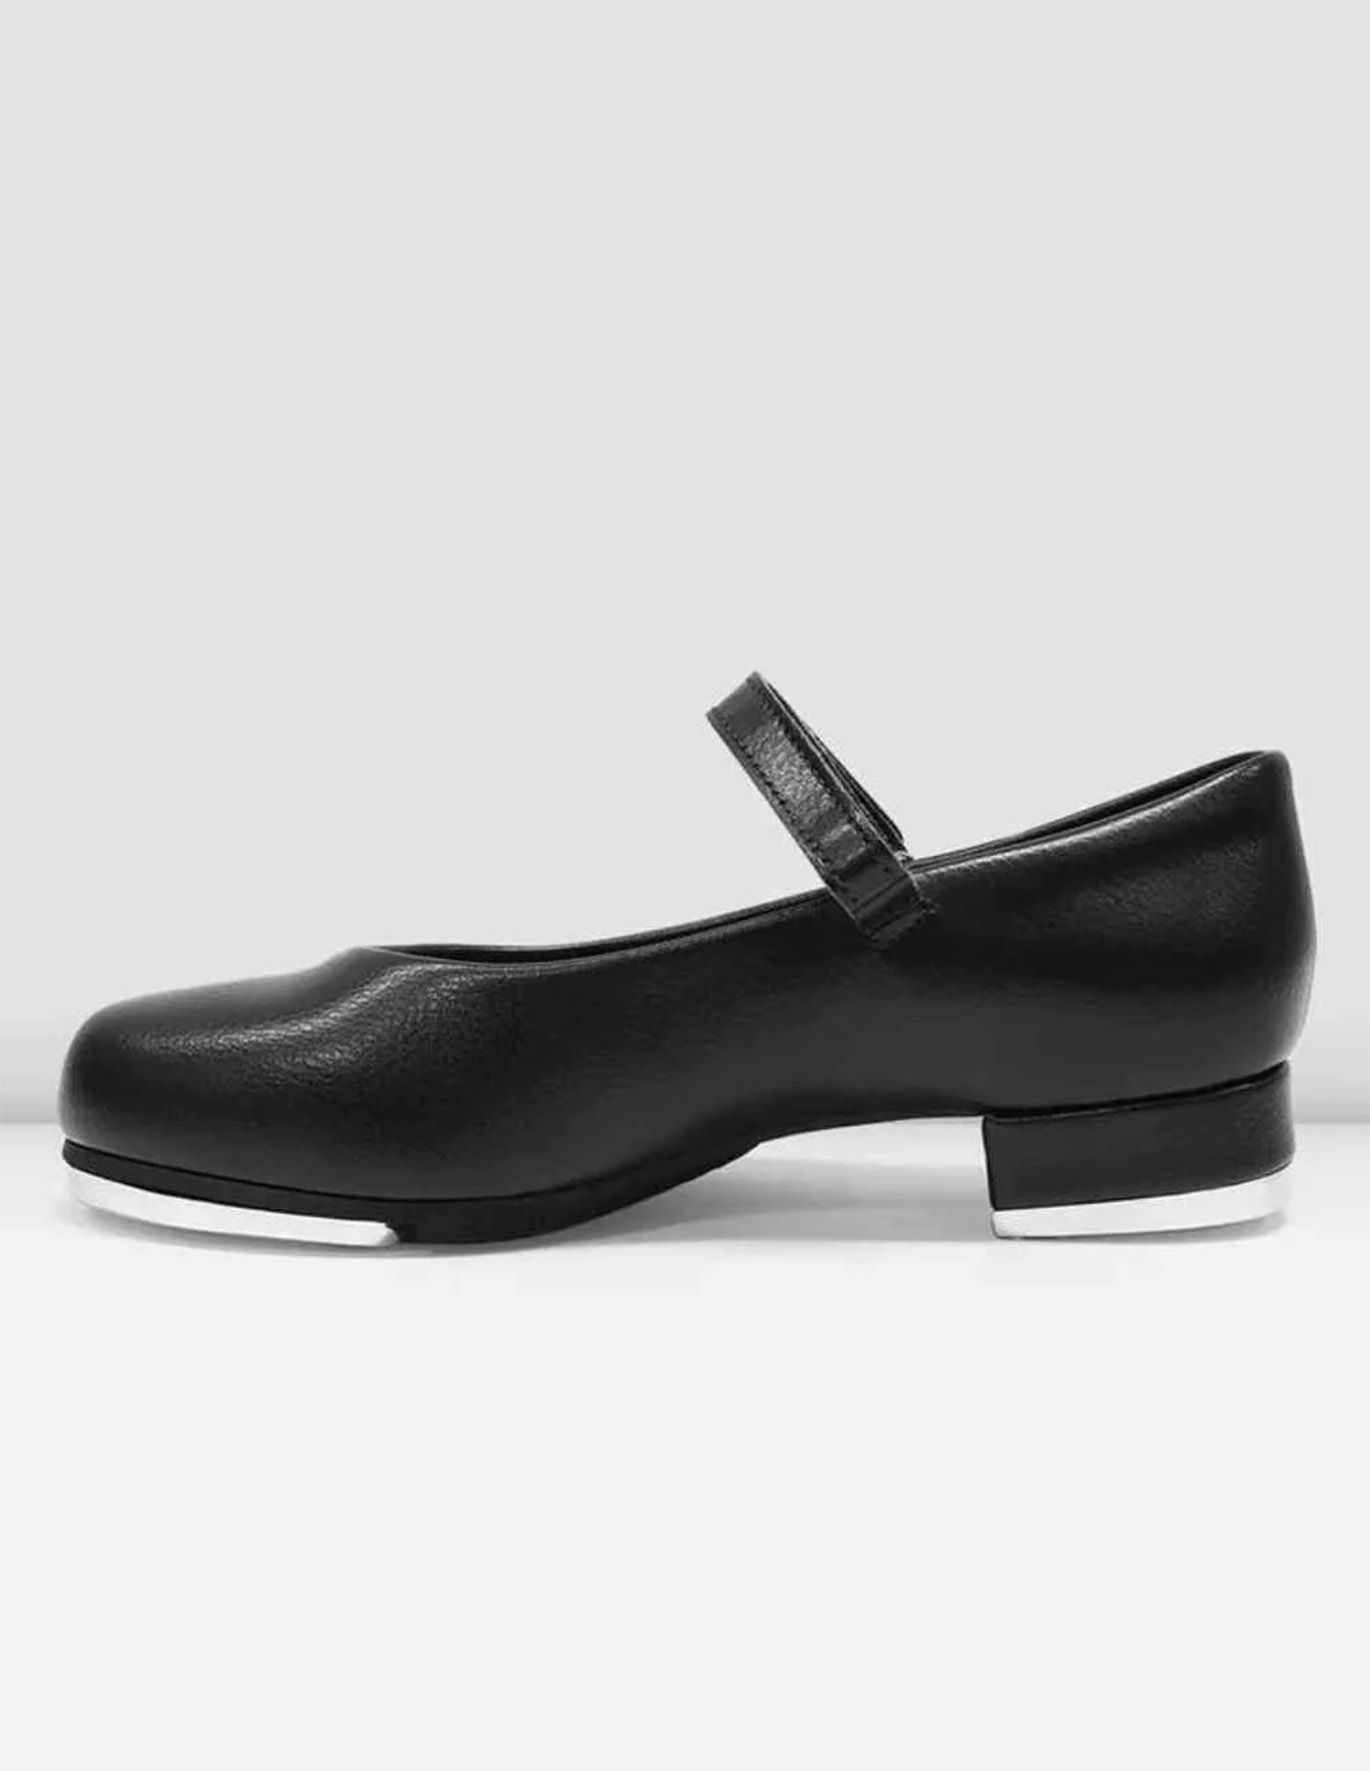 Bloch Melody Velcro Strap Synthetic Leather Tap Shoe S0335